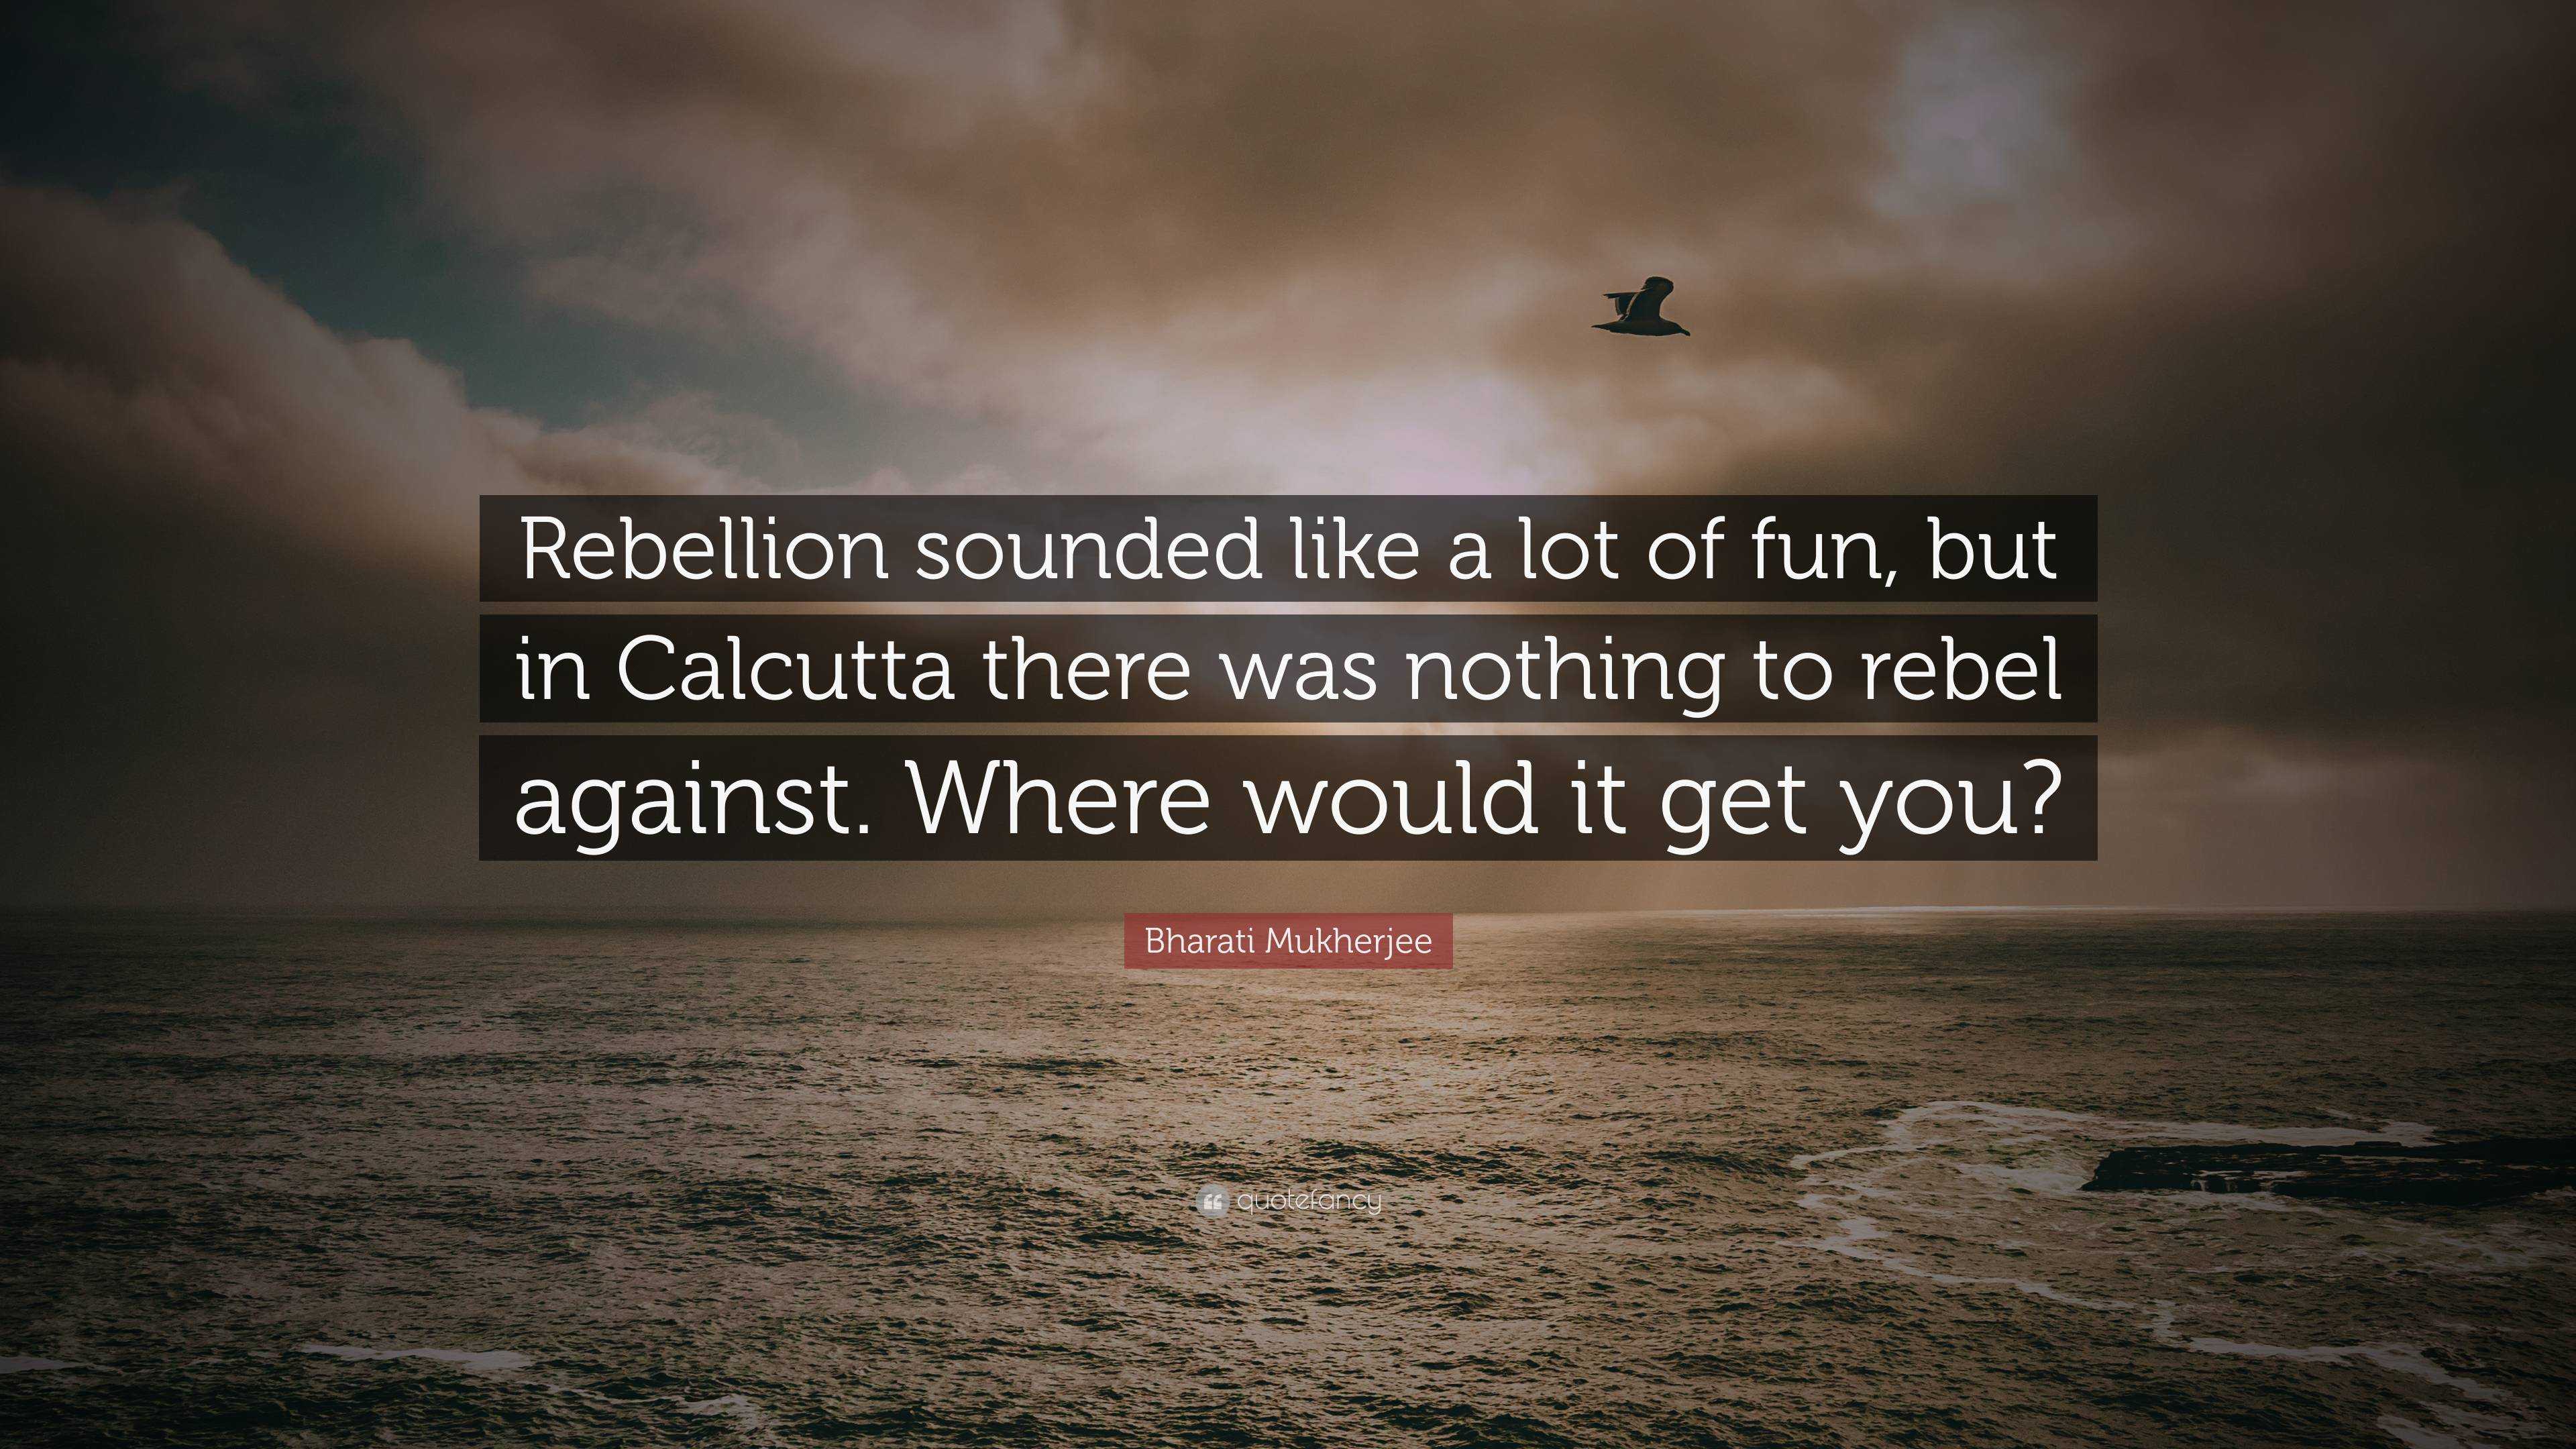 Bharati Mukherjee Quote: “Rebellion sounded like a lot of fun, but in ...